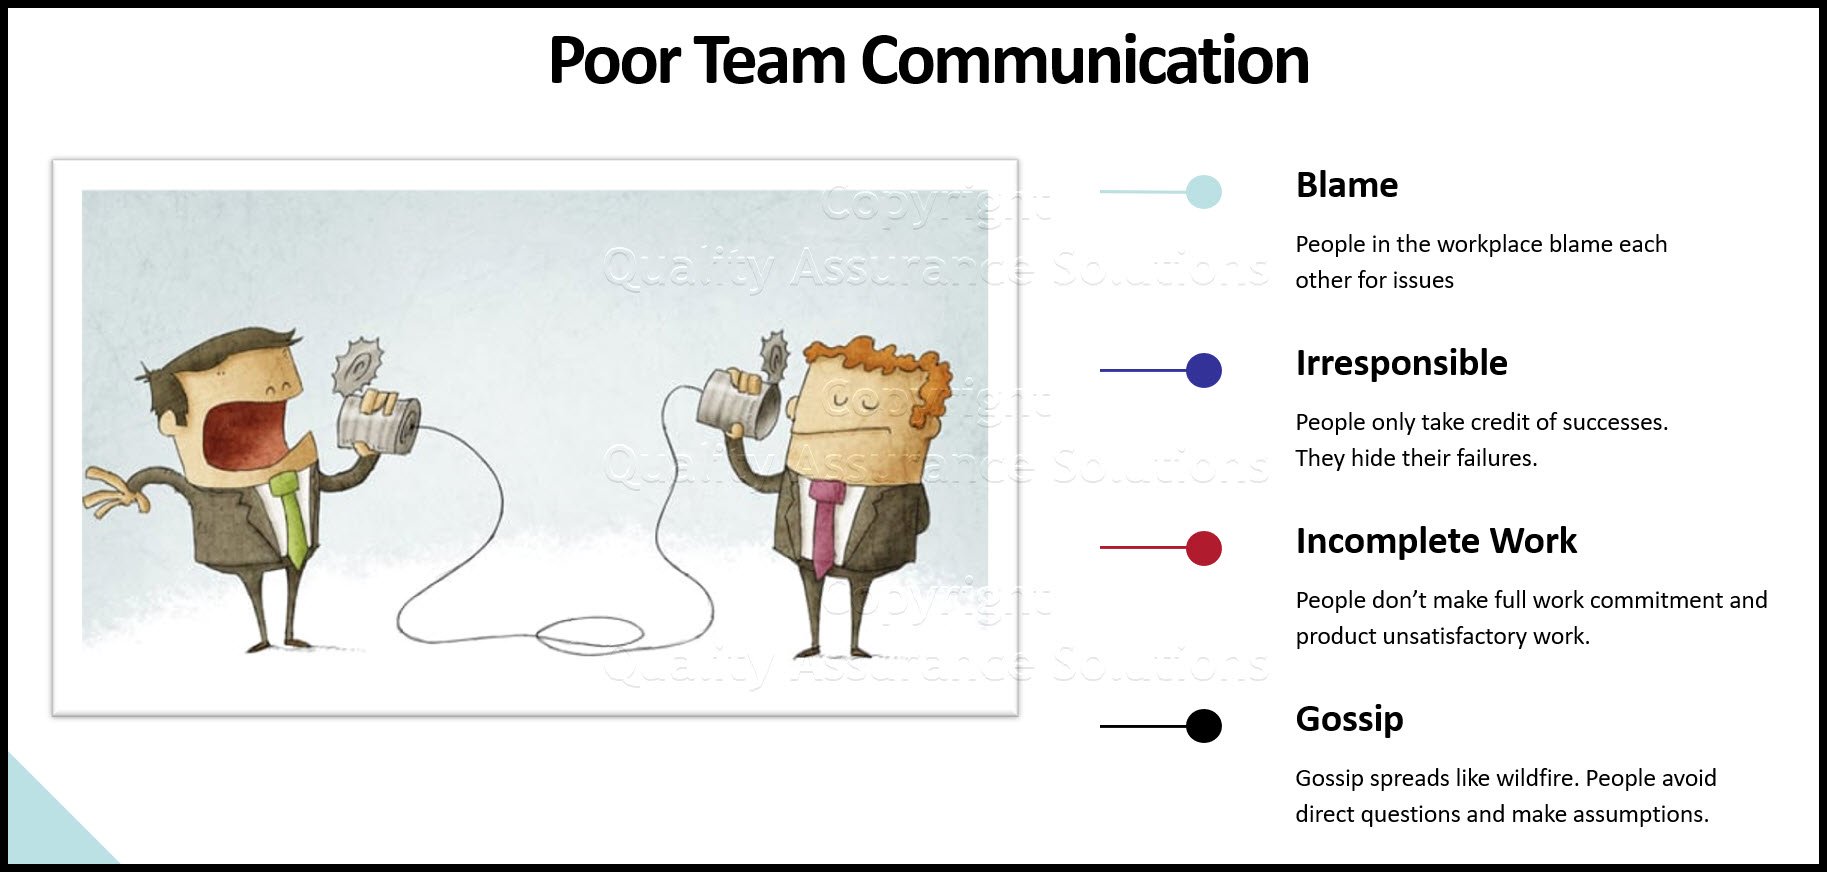 How to improve communication skills to deepen relationships on your team and minimize confusion.